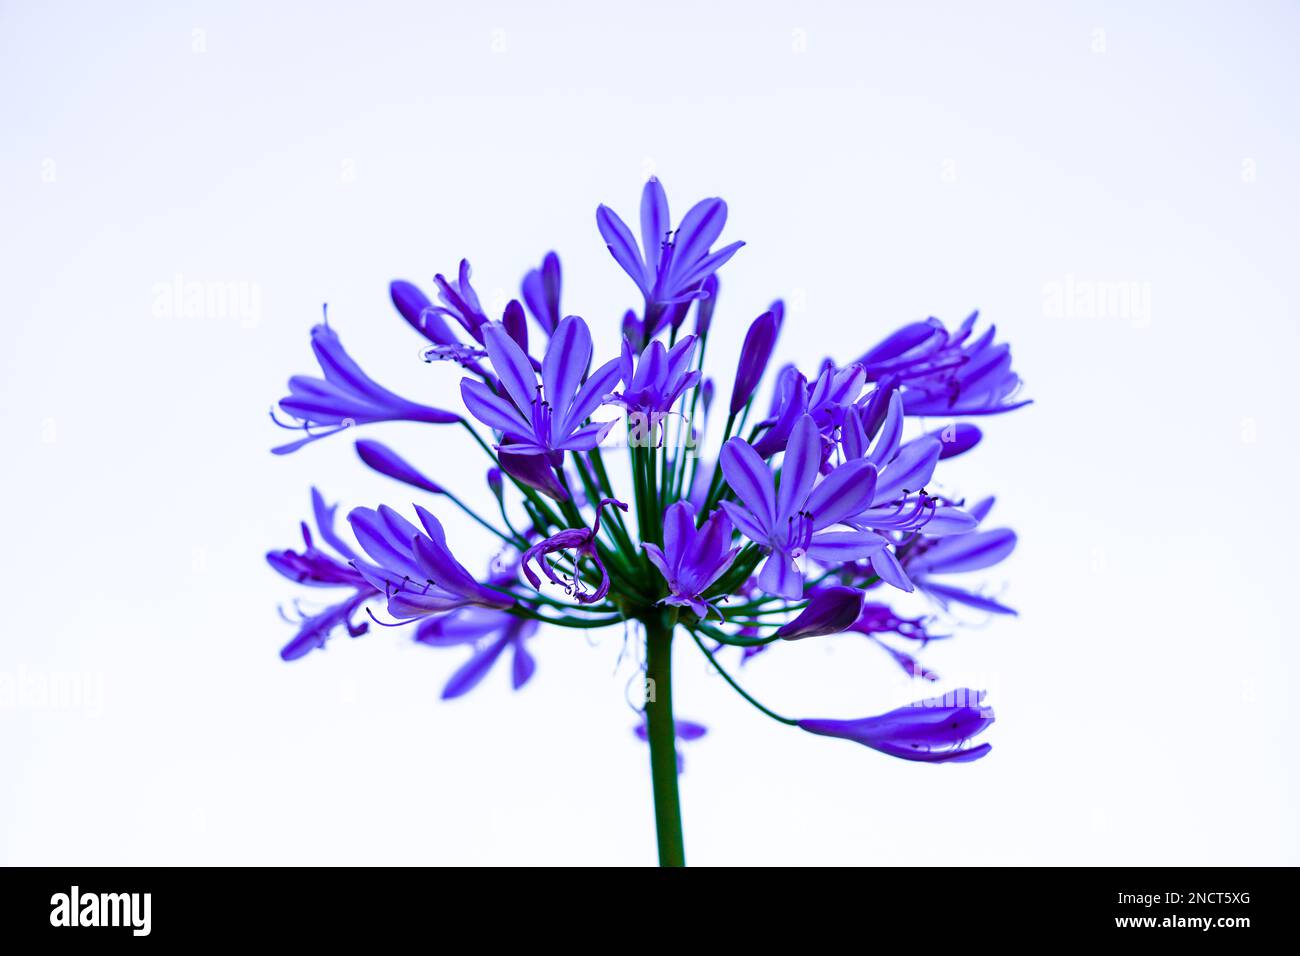 African lily close-up. Flowering plant with a large purple flower. Agapanthus. Stock Photo